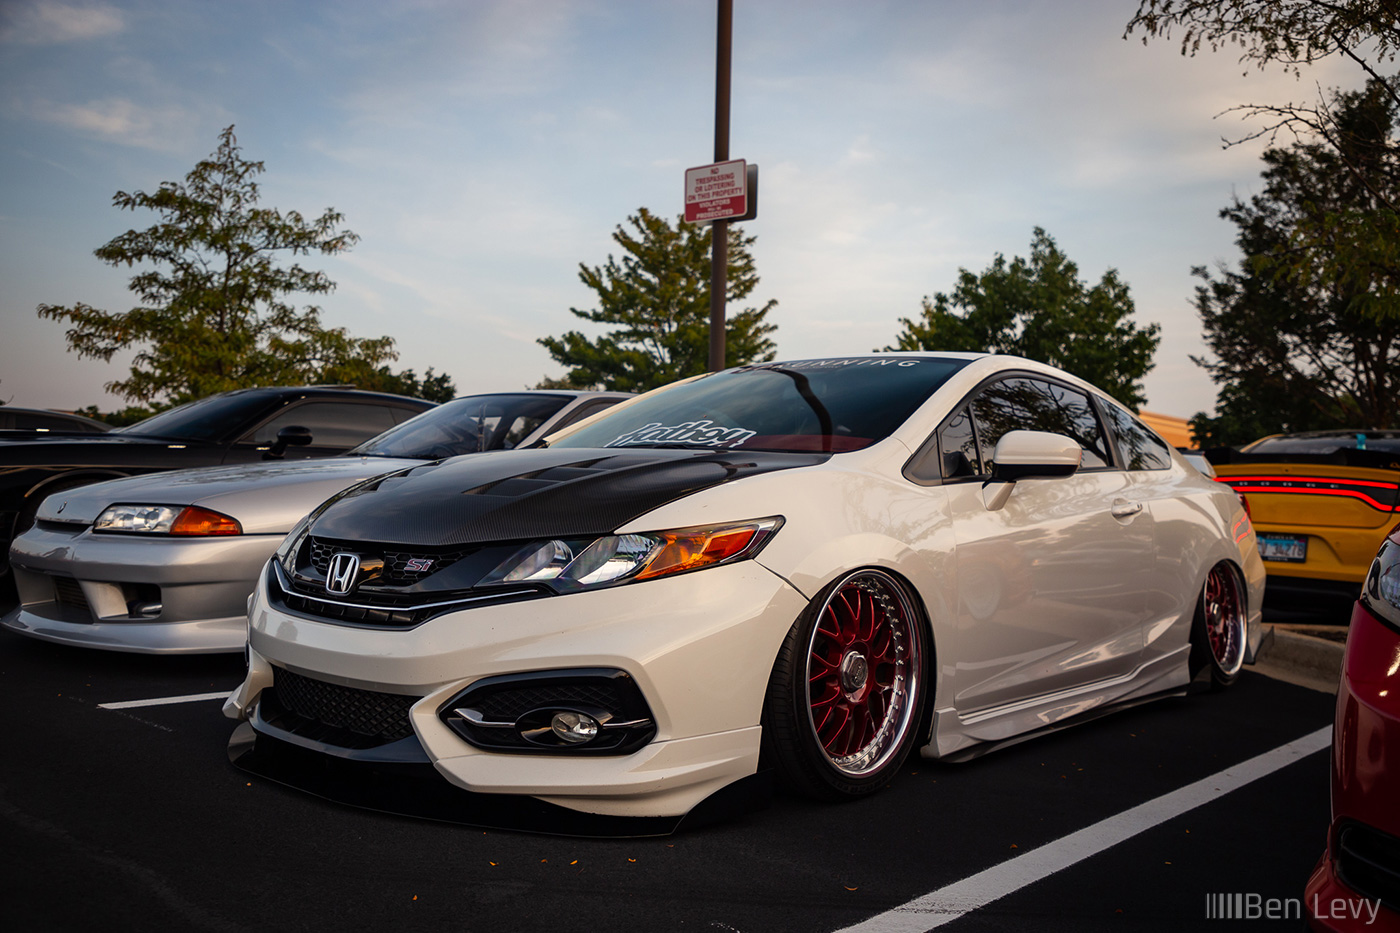 Bagged Honda Civic Si Coupe at Cars and Culture Mee